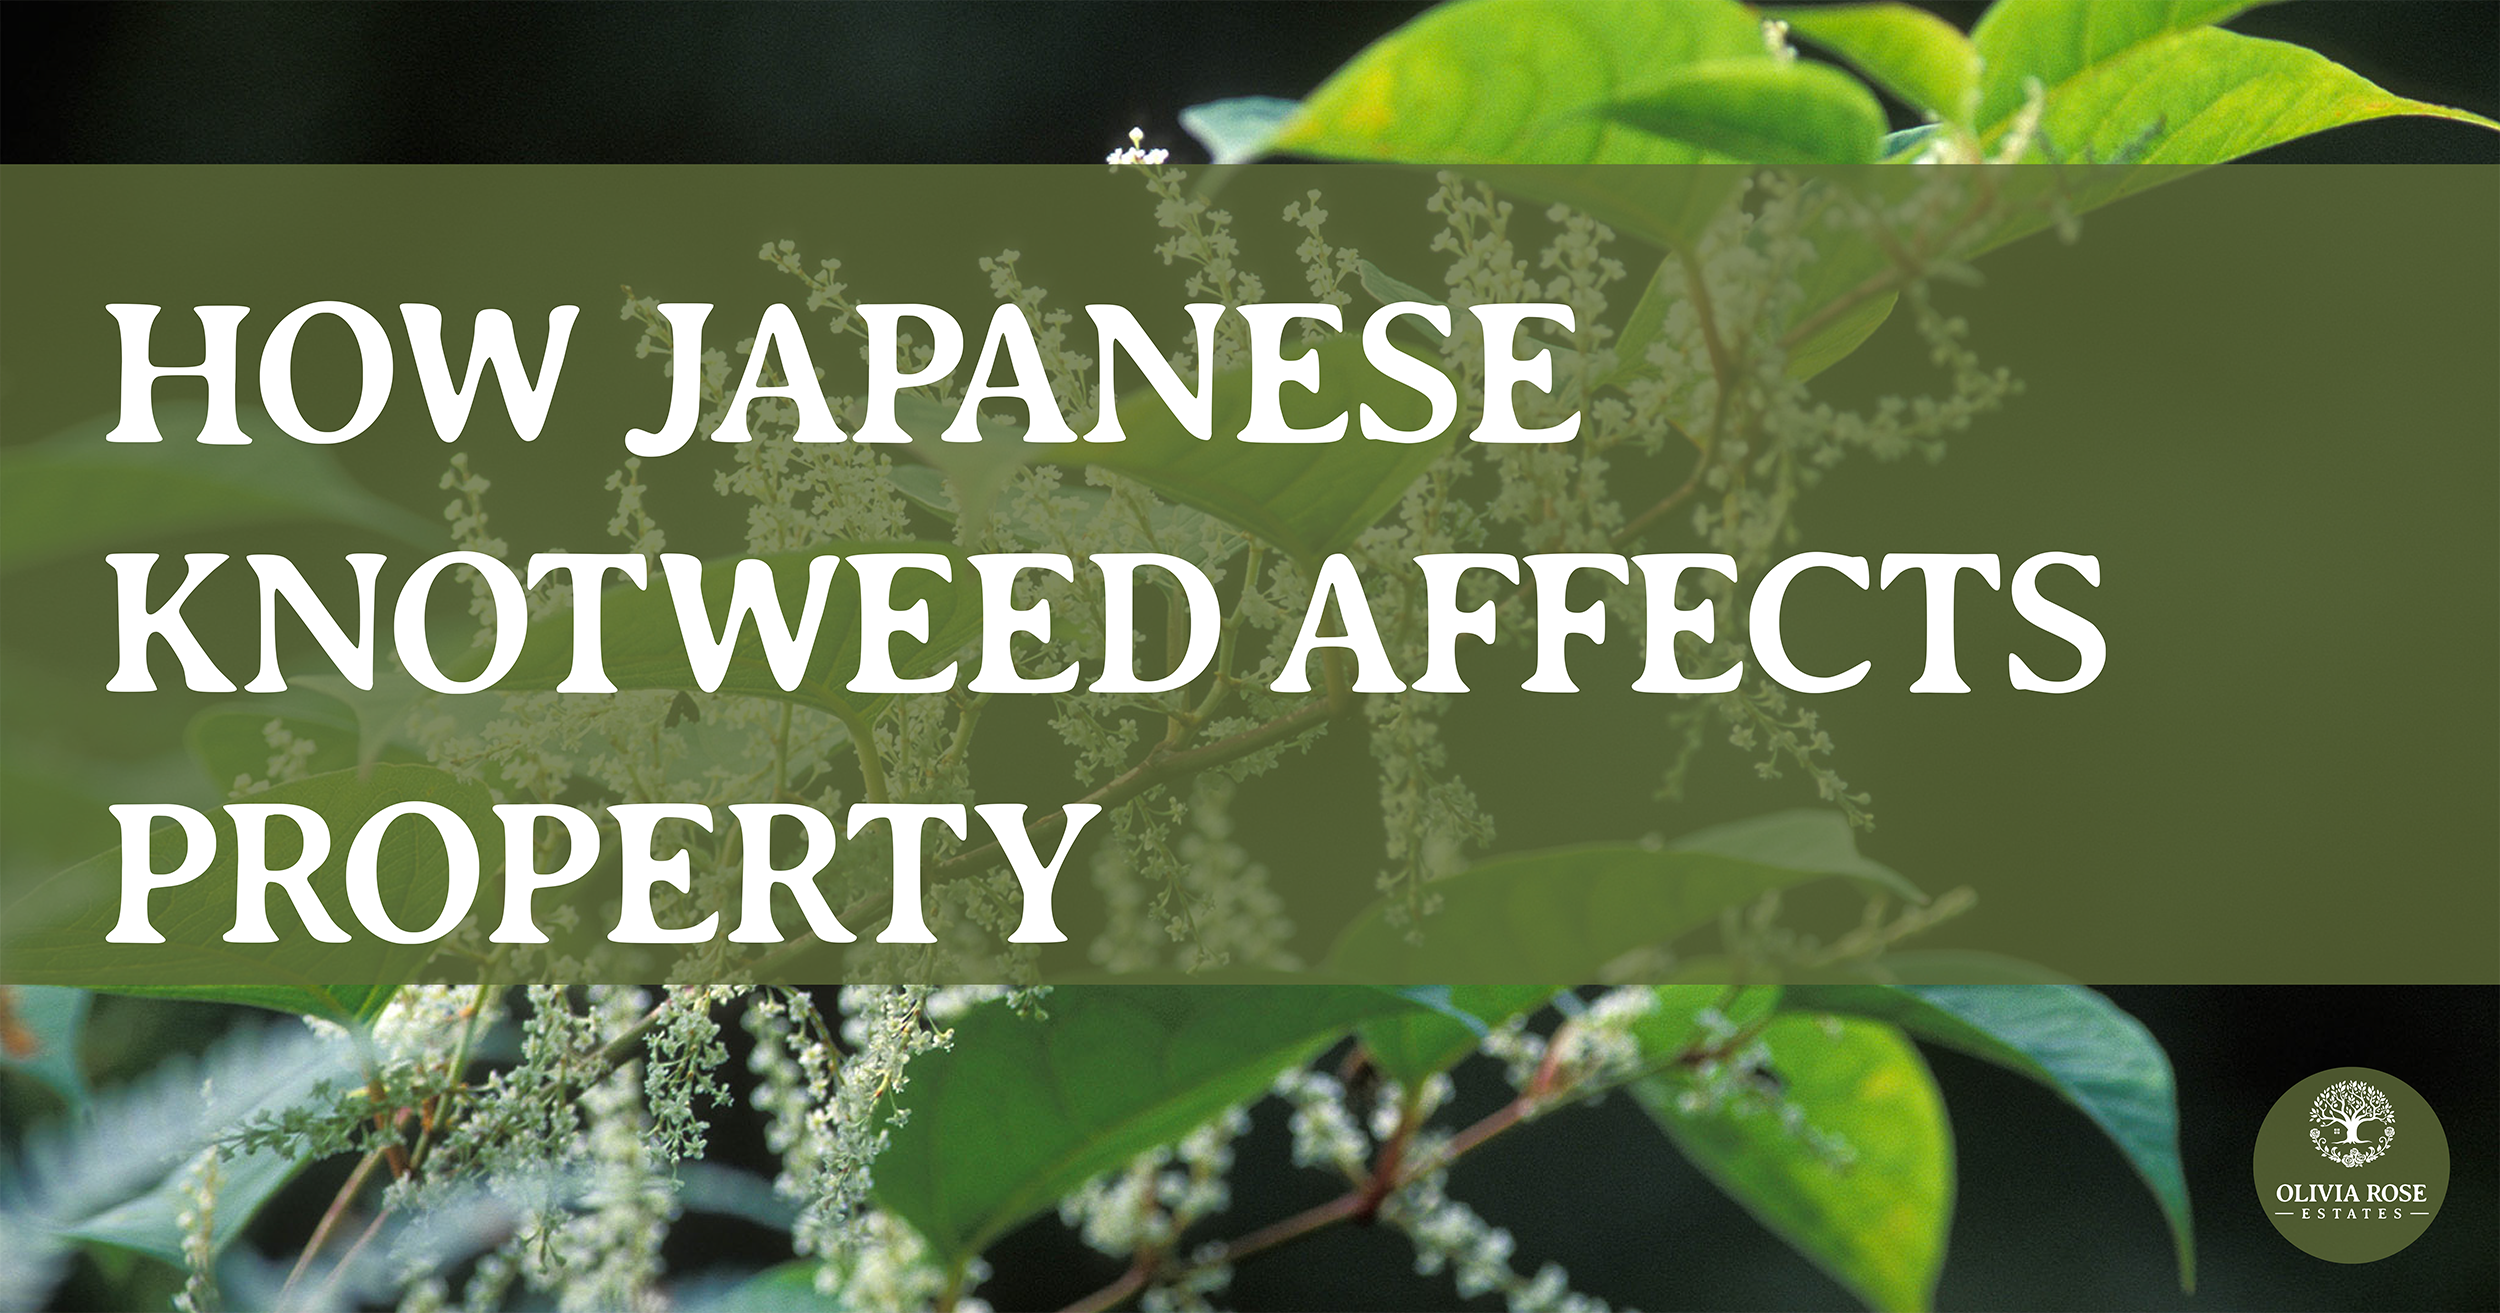 How Japanese Knotweed Affects Property